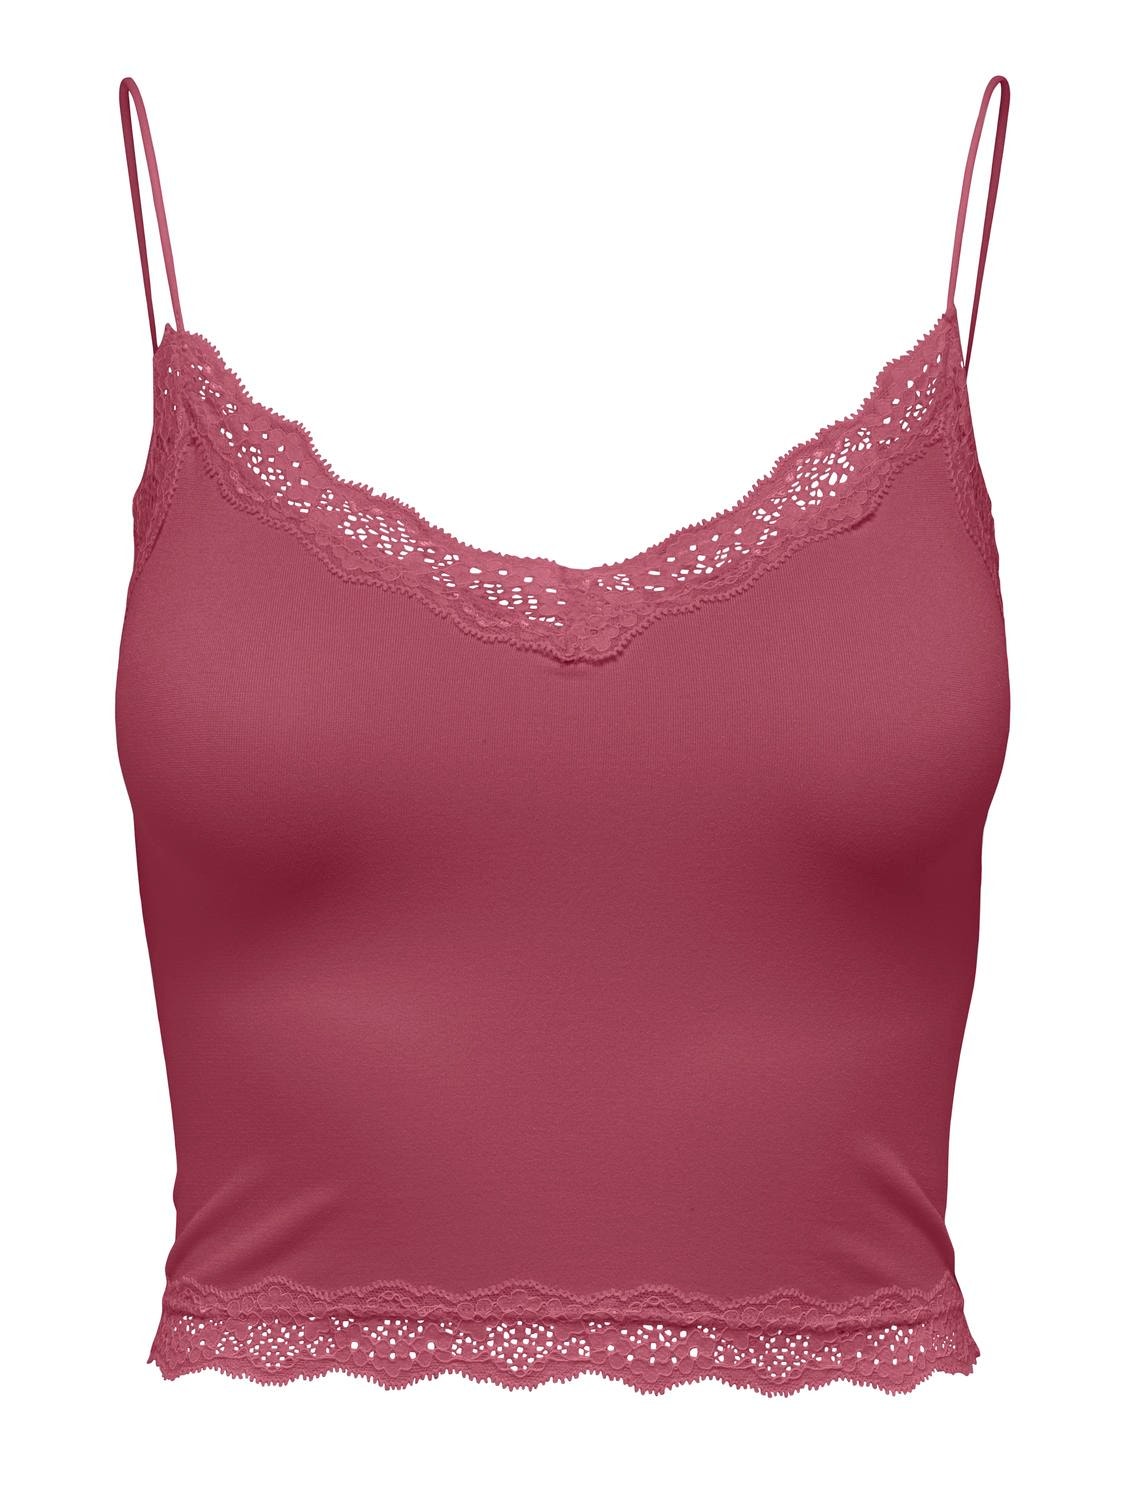 ONLY Crop Top -Dry Rose - 15190175